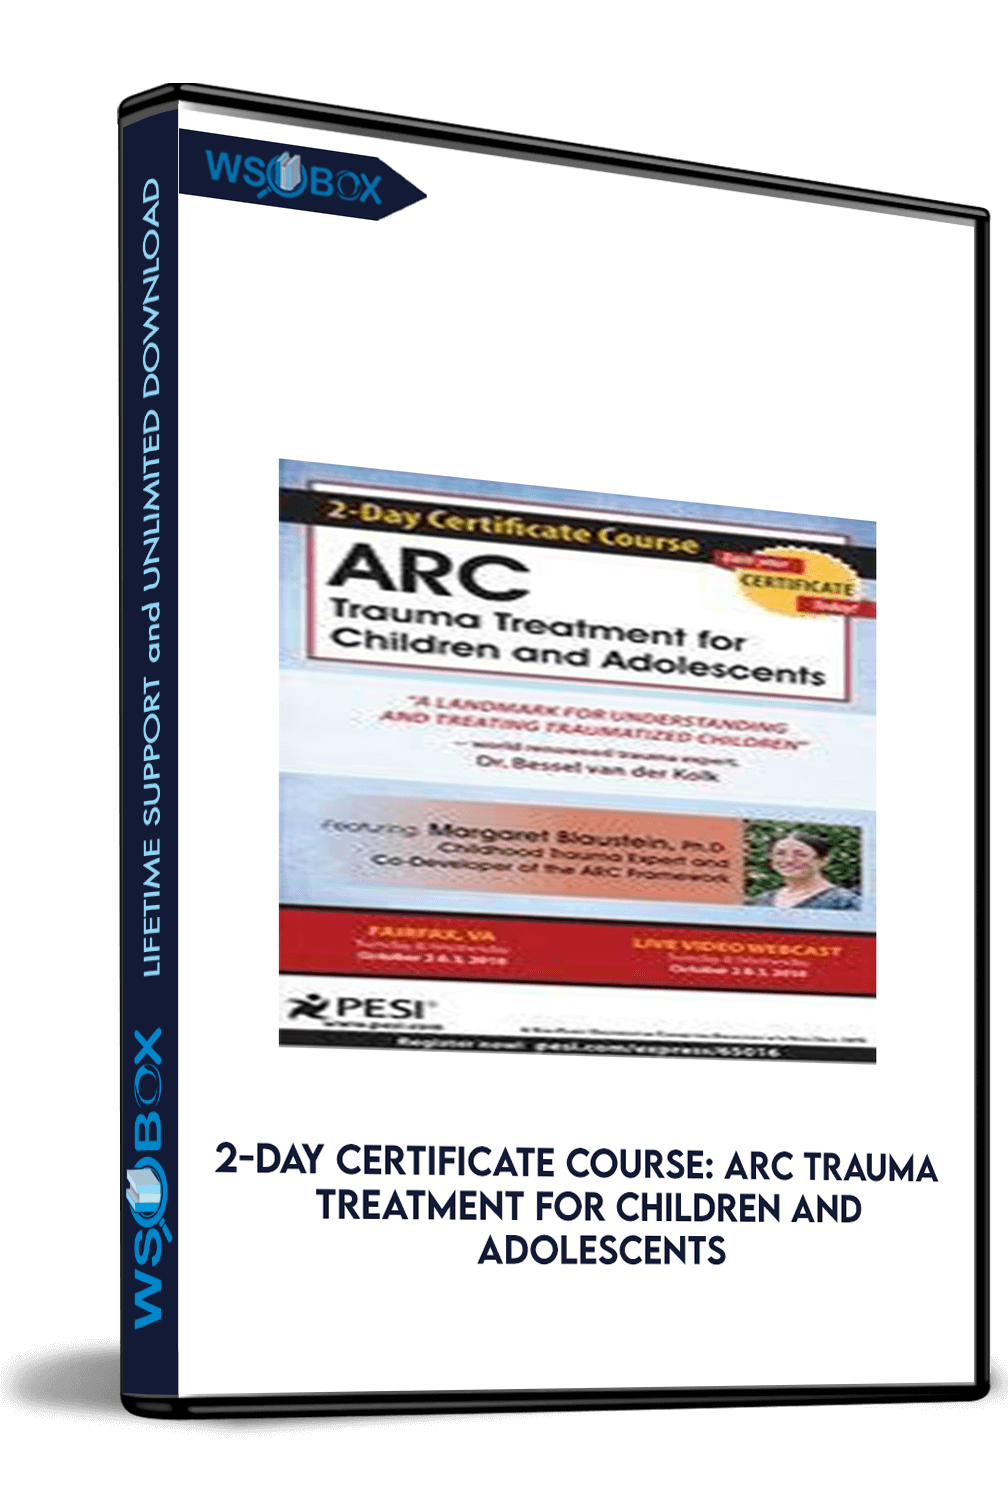 2-Day Certificate Course: ARC Trauma Treatment For Children and Adolescents